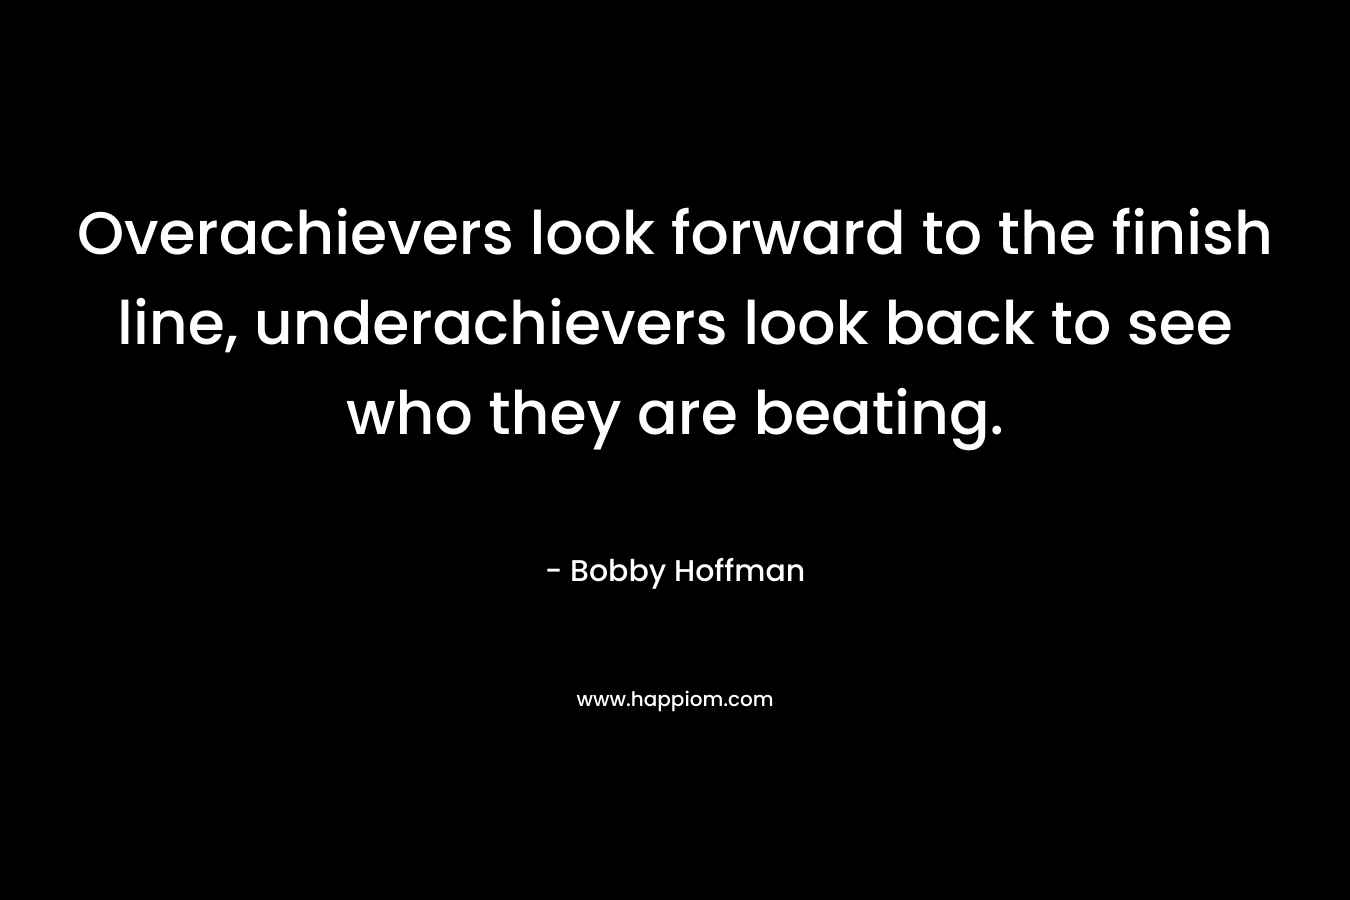 Overachievers look forward to the finish line, underachievers look back to see who they are beating.